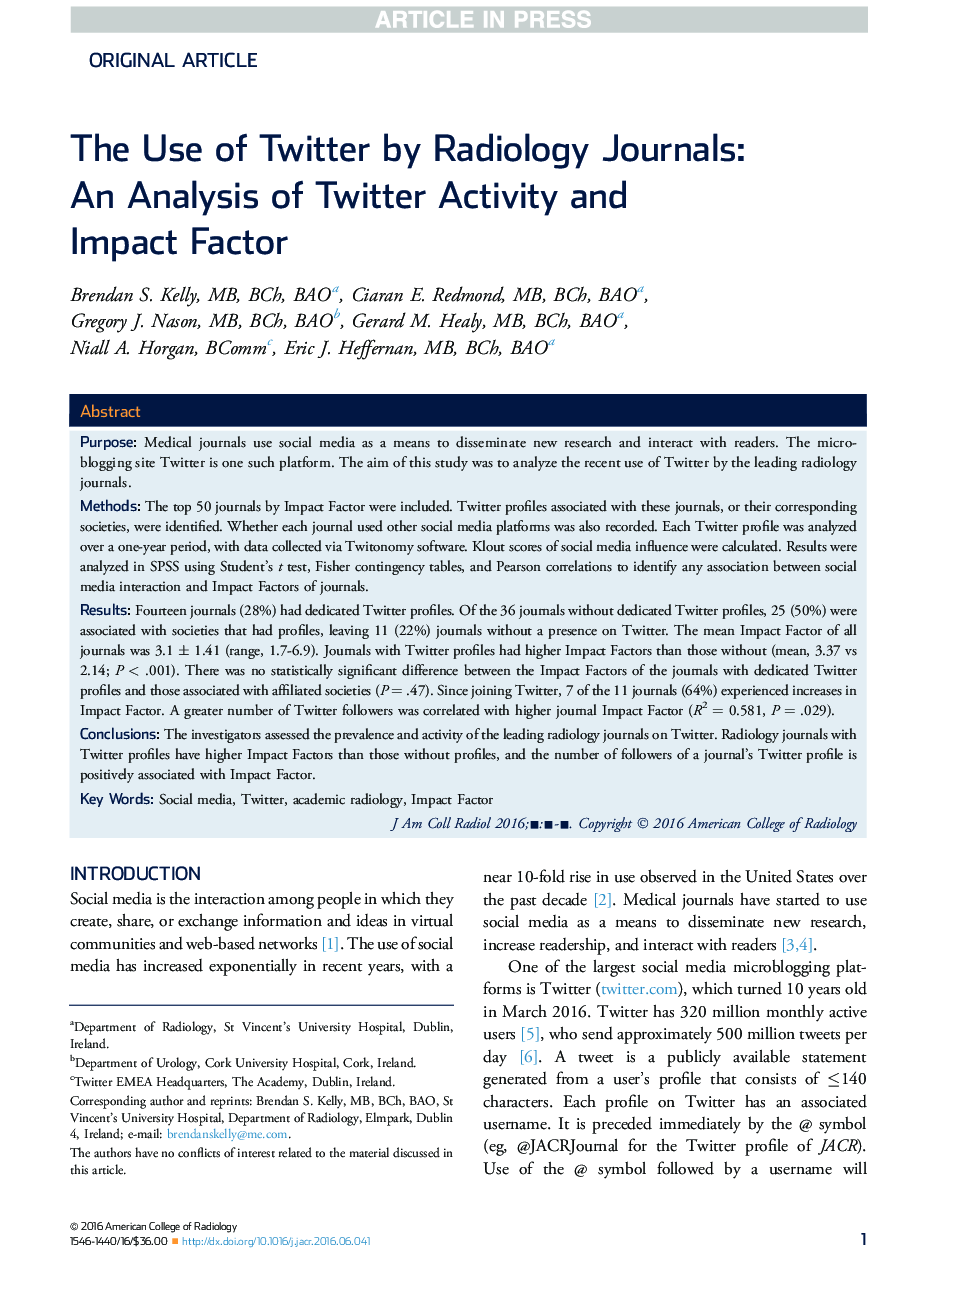 The Use of Twitter by Radiology Journals: An Analysis of Twitter Activity and ImpactÂ Factor